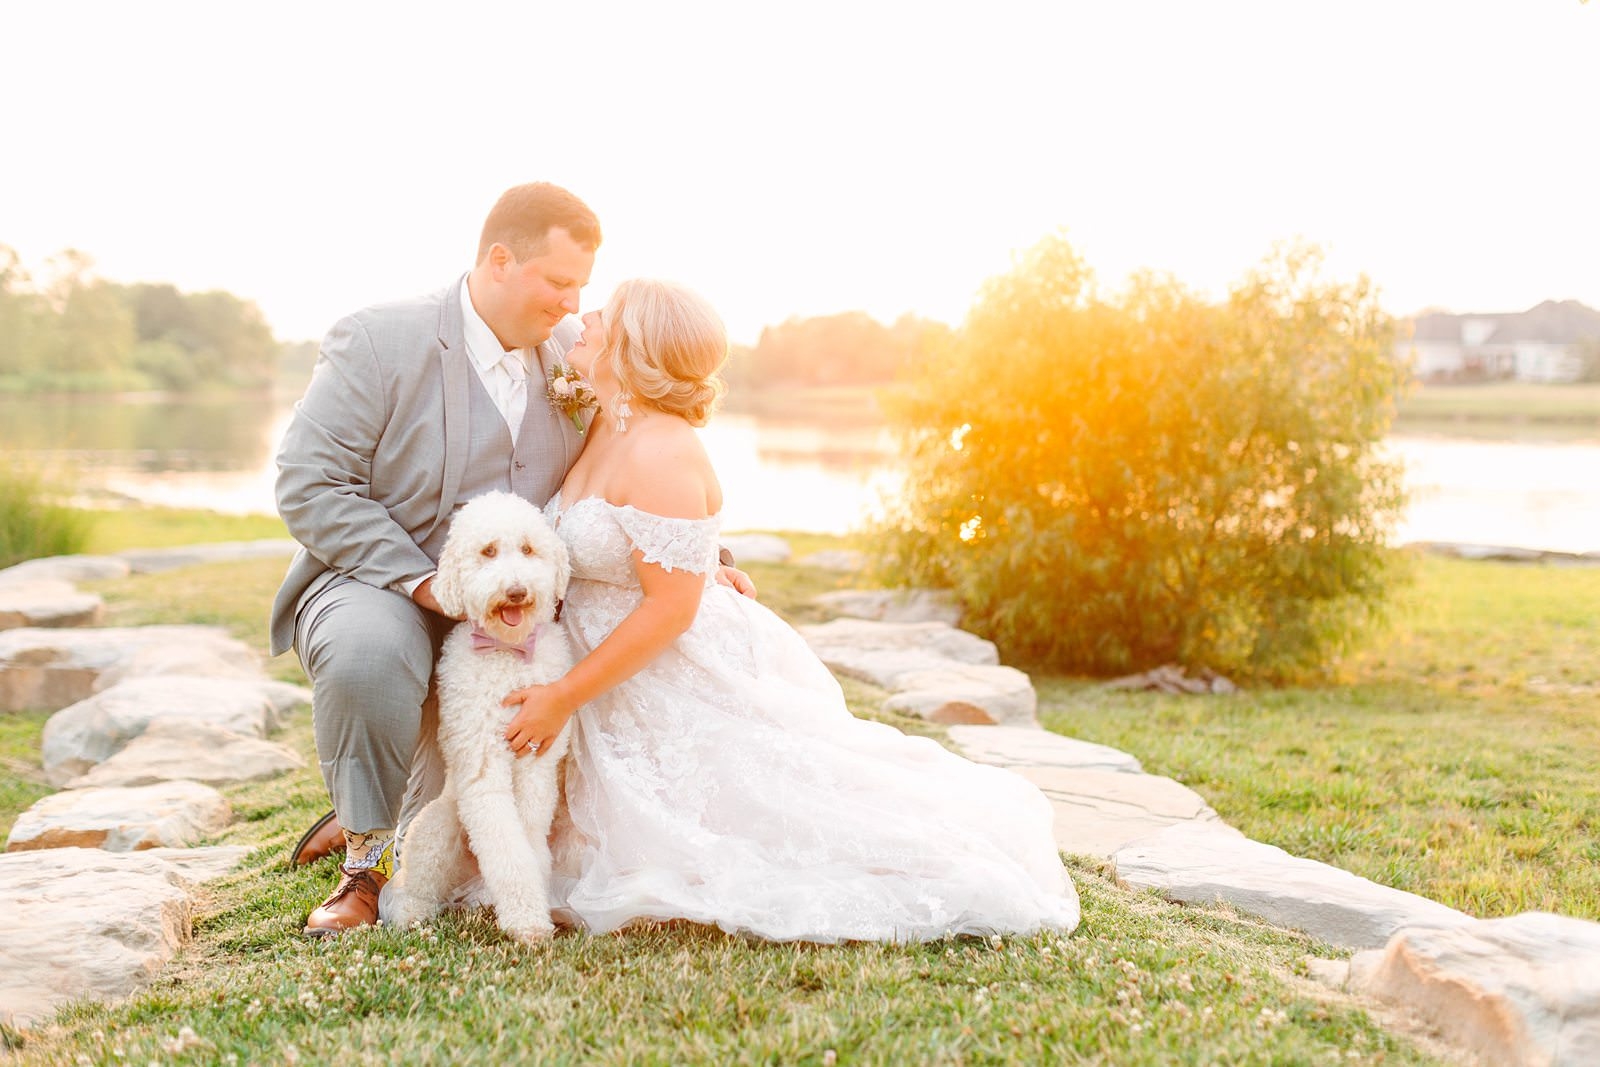 A Sunny Summer Wedding at Friedman Park in Newburgh Indiana | Paige and Dylan | Bret and Brandie Photography182.jpg